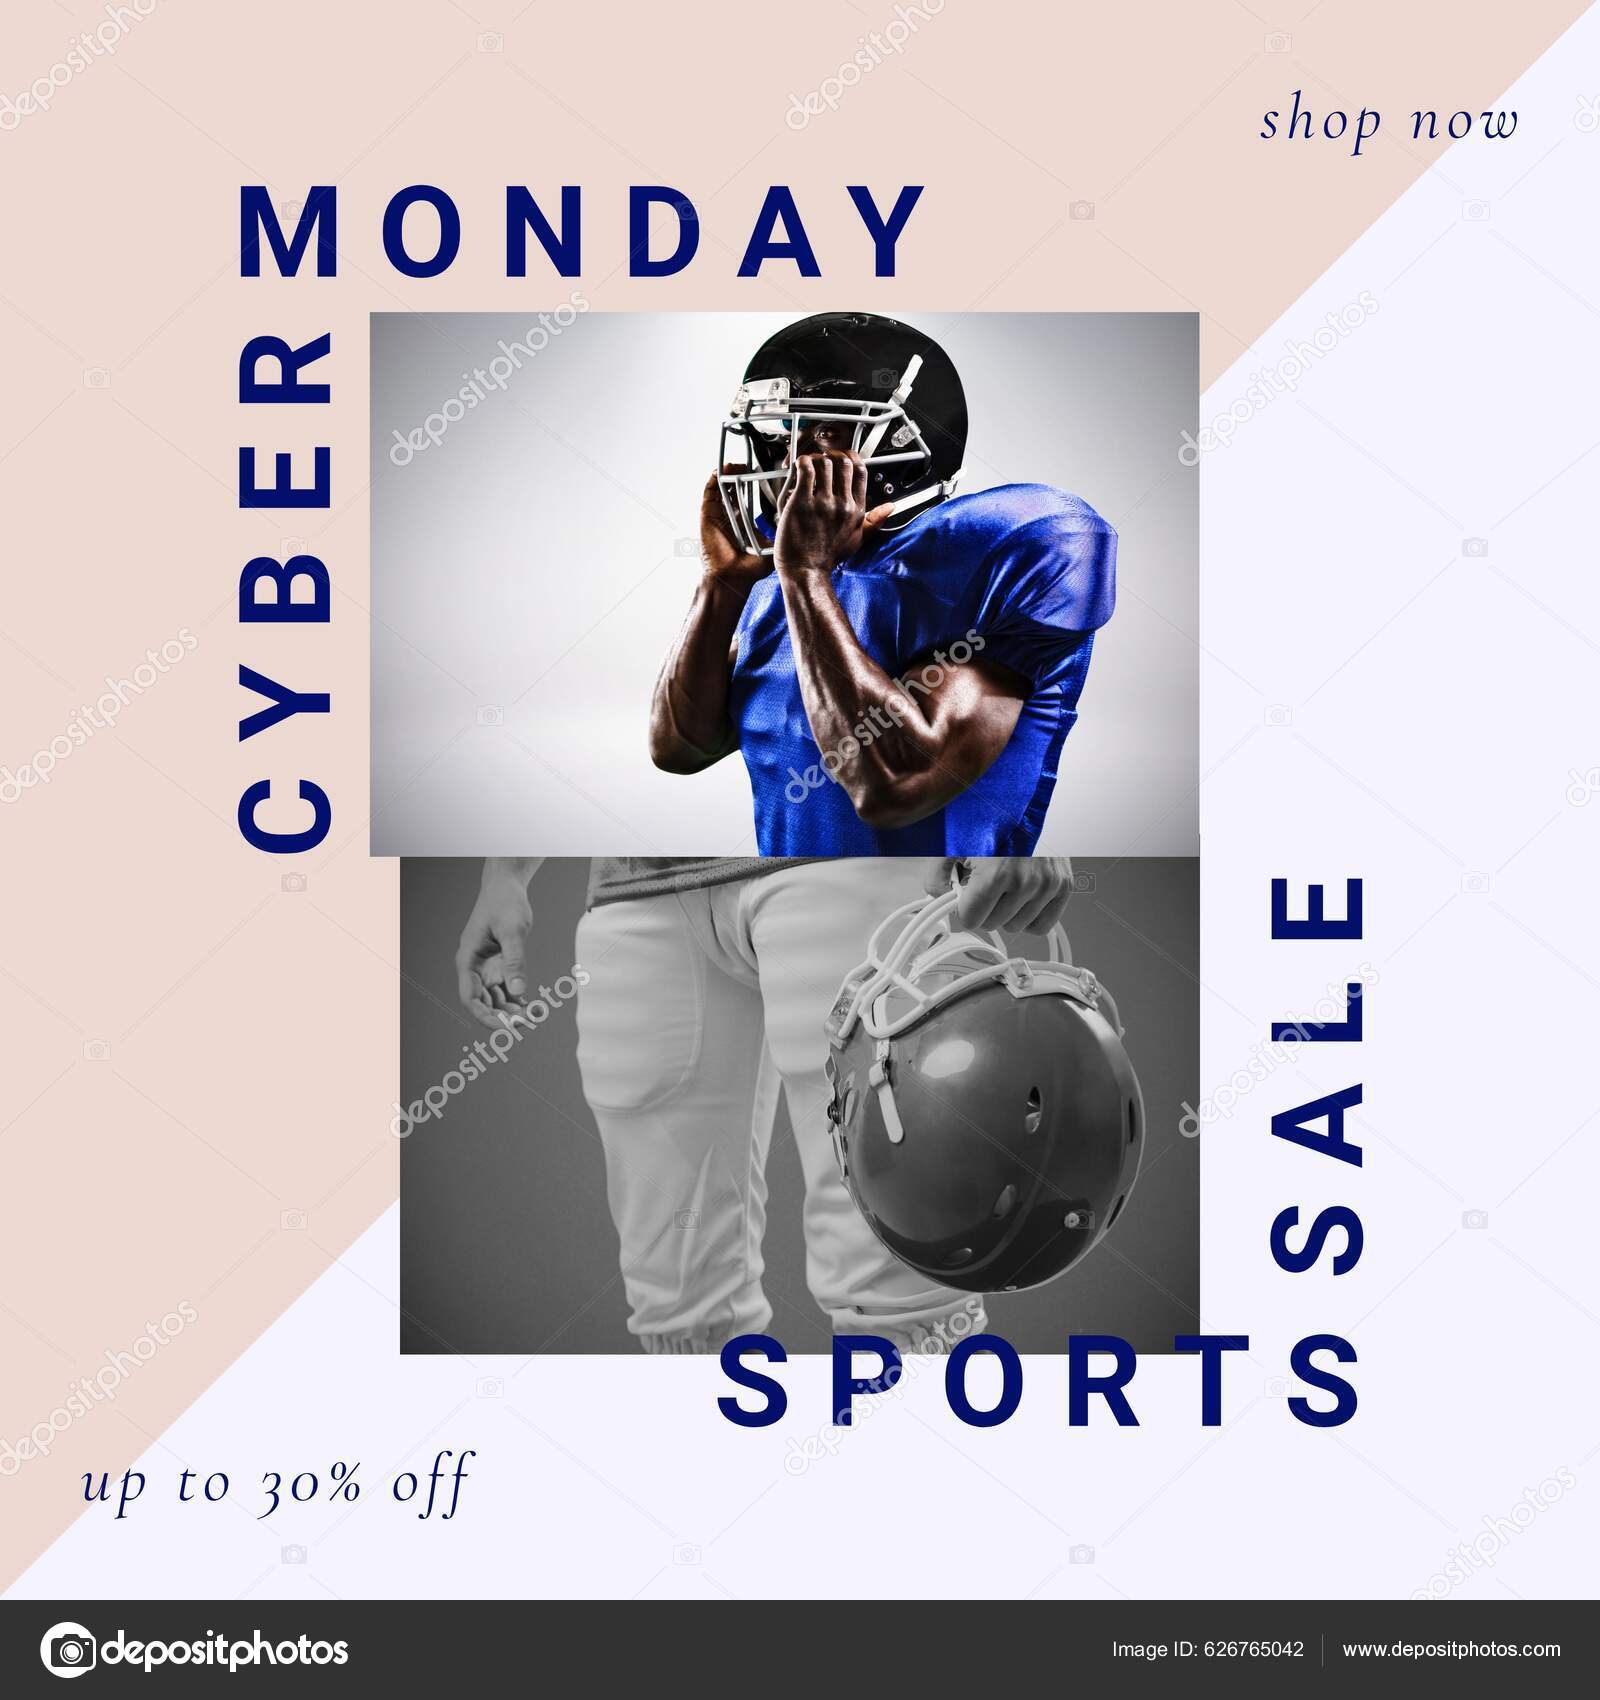 Image Cyber Monday African American Male American Football Players Sport Stock Photo by ©vectorfusionart 626765042